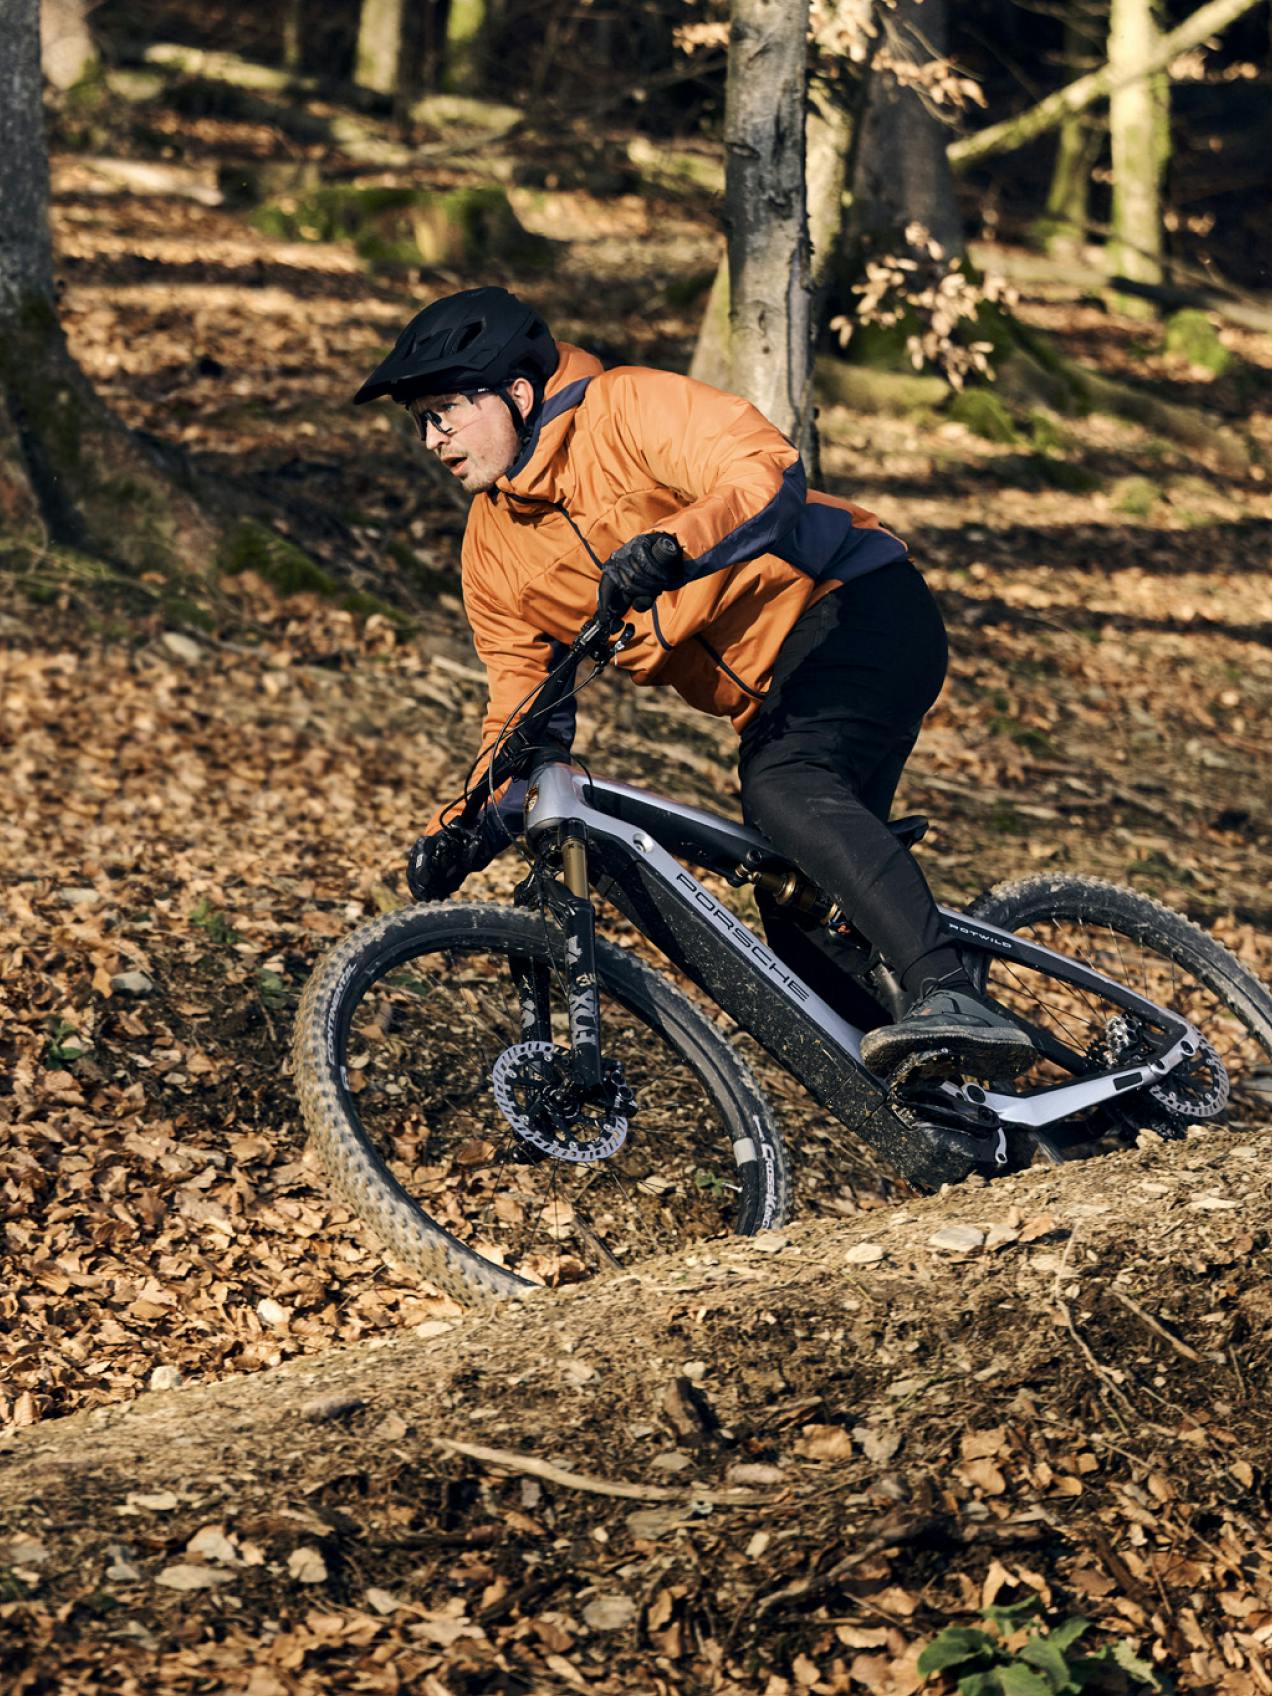 A cyclist is pictured wearing an orange out-door jacket and riding the Porsche Ebike Cross on an unpaved path.